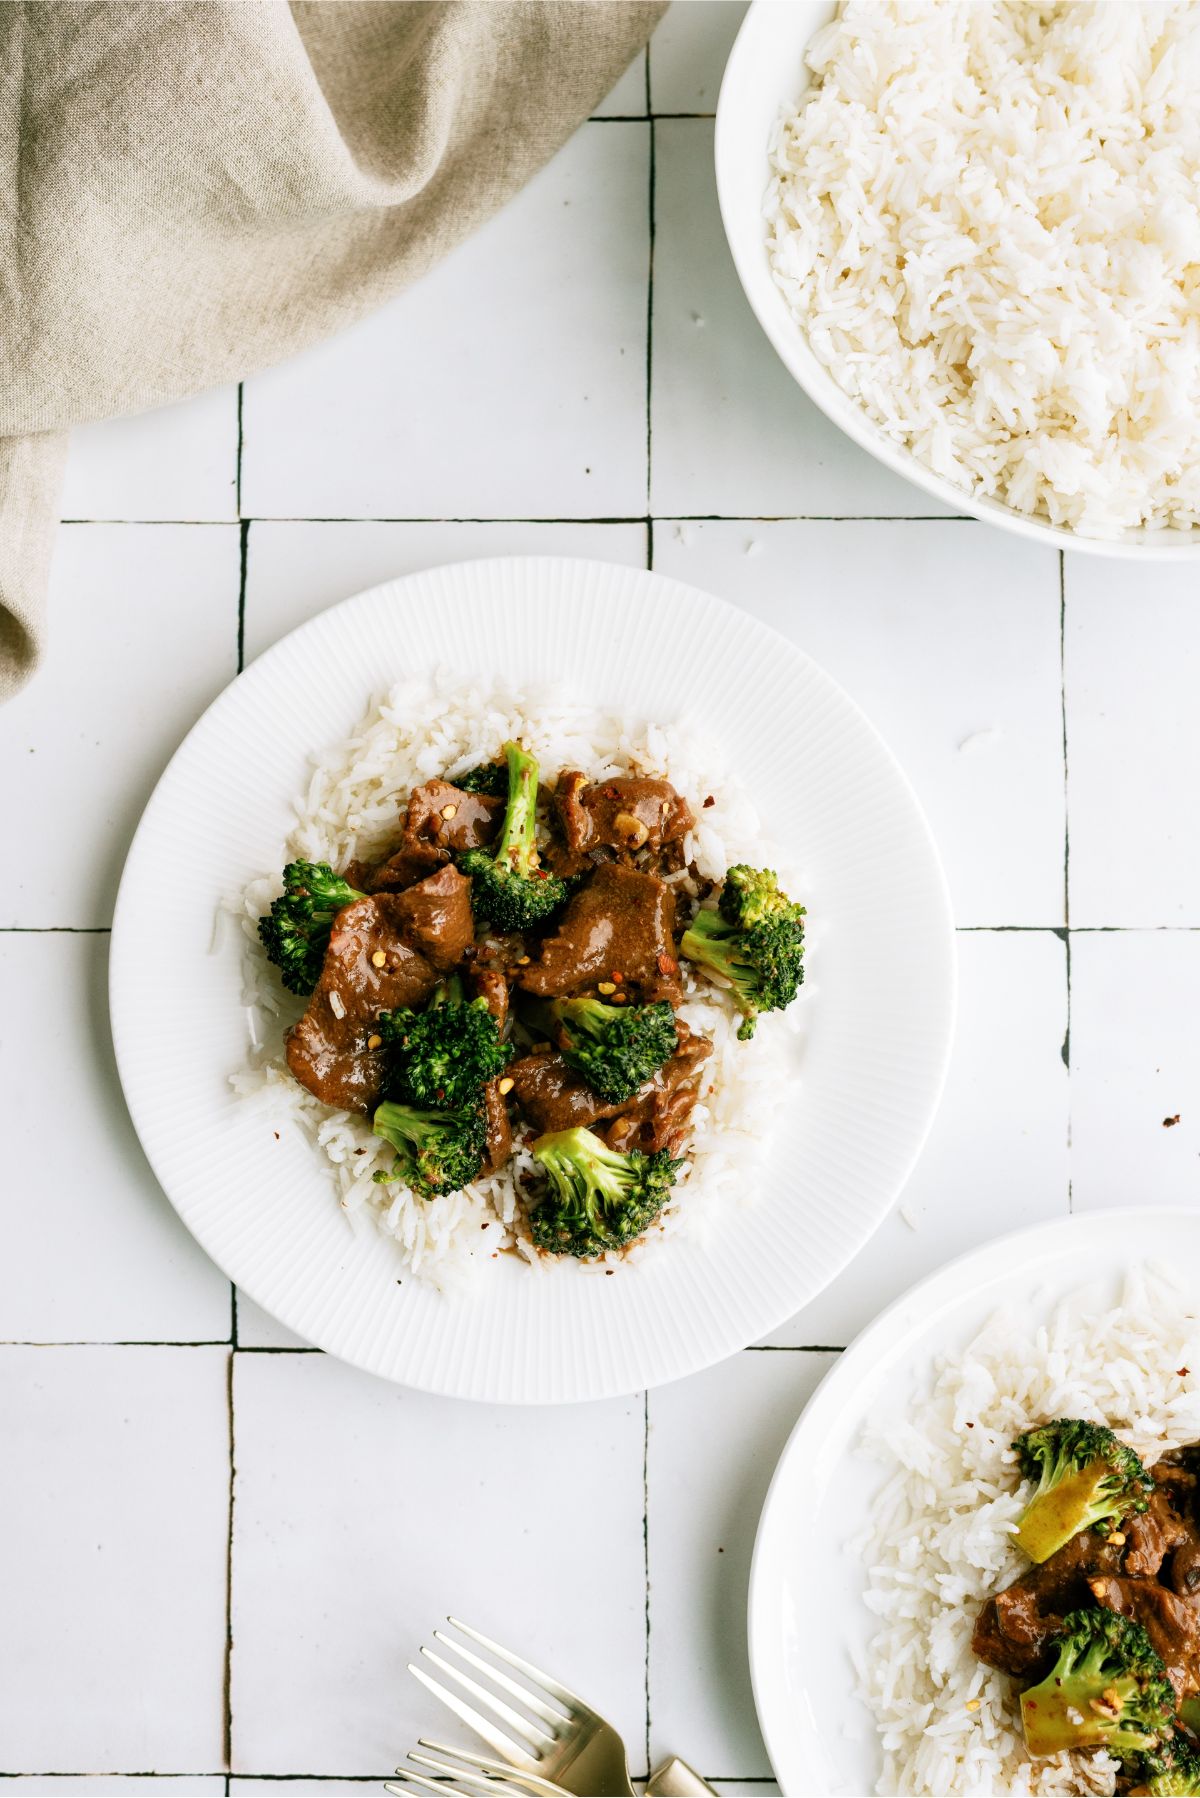 A serving of Slow Cooker Beef and Broccoli on a plate over rice